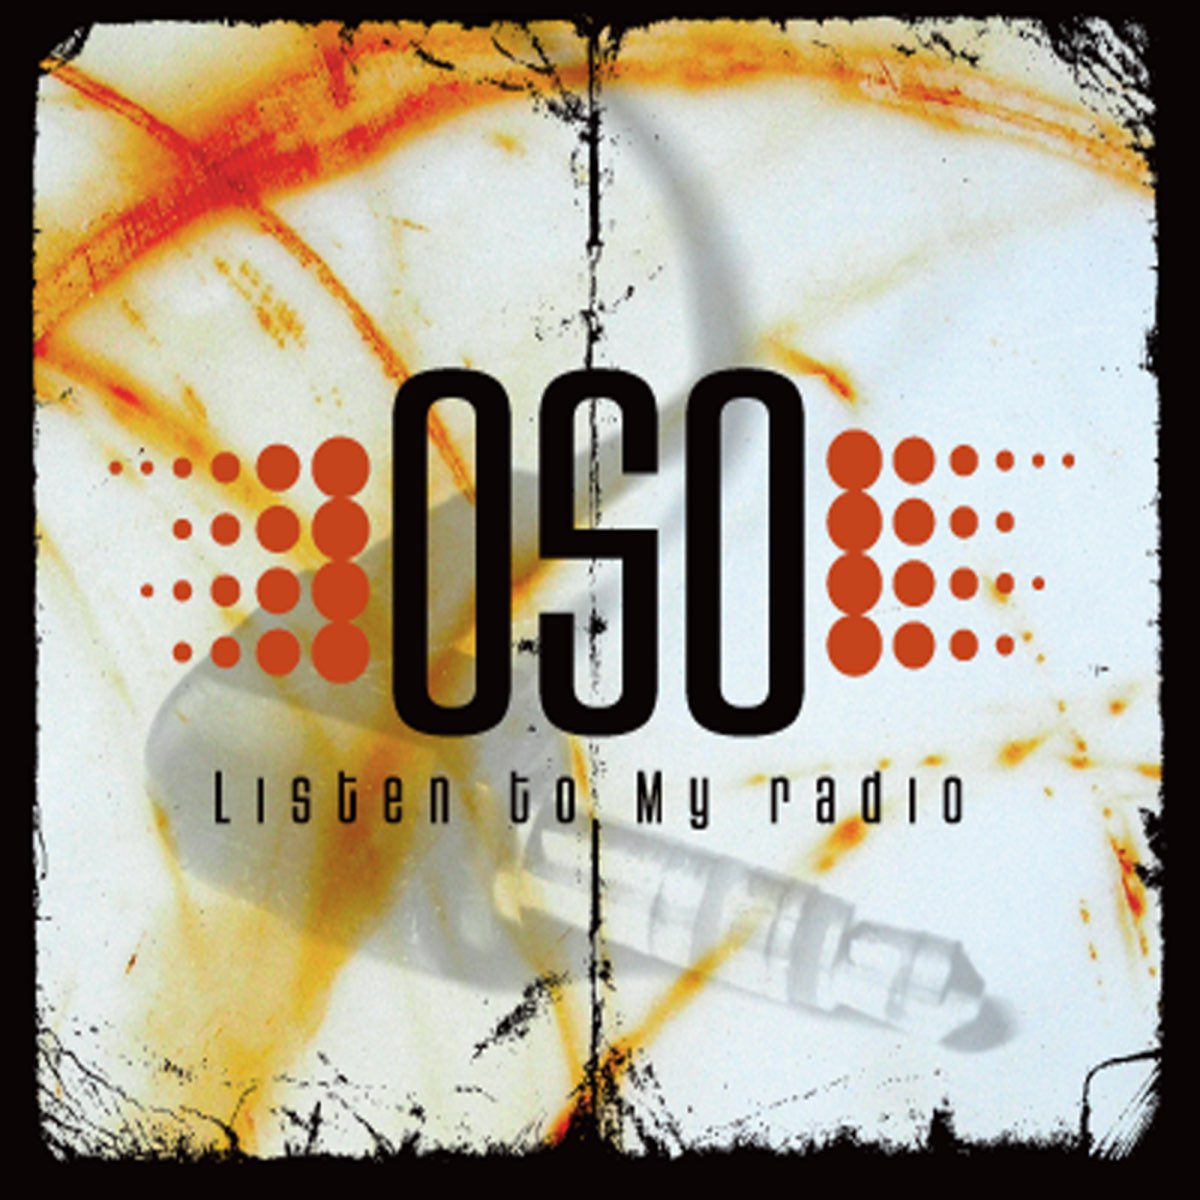 Listen to My Radio by Oso on Apple Music